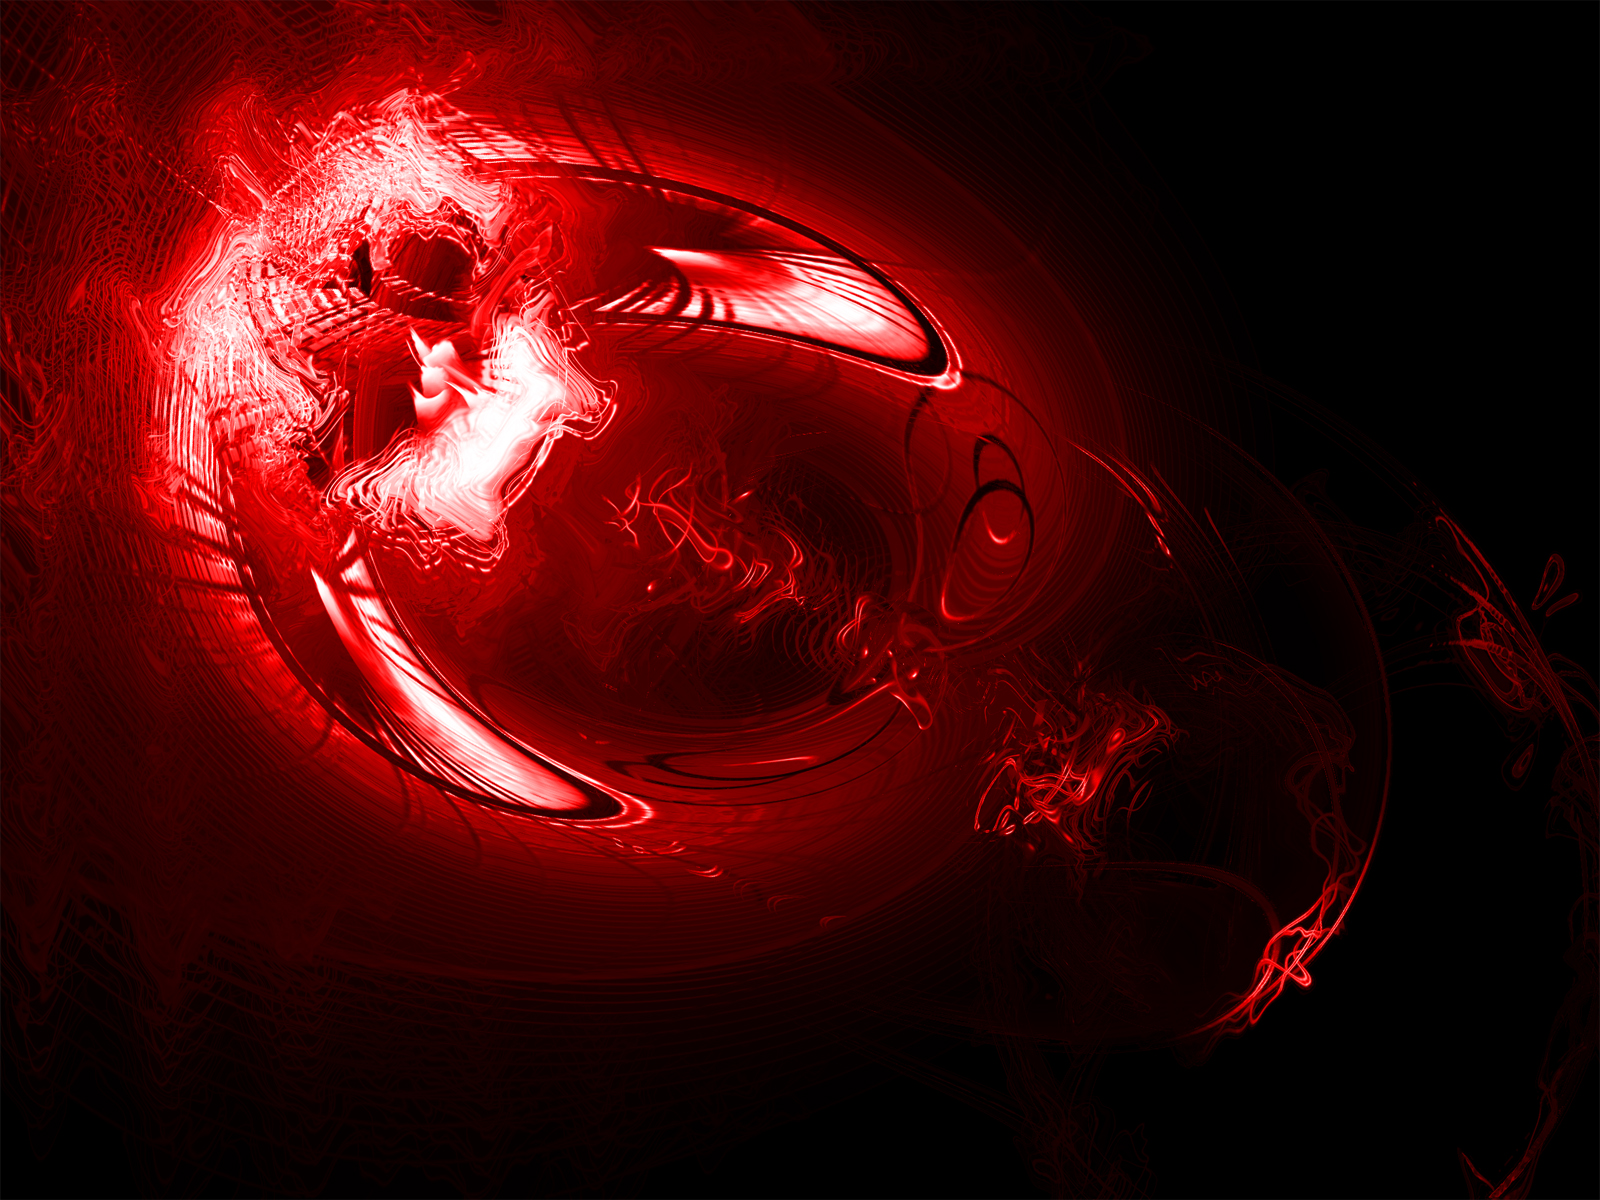 Wallpaper 50 Space Jellyfish Red and Black Wallpapers 1600x1200